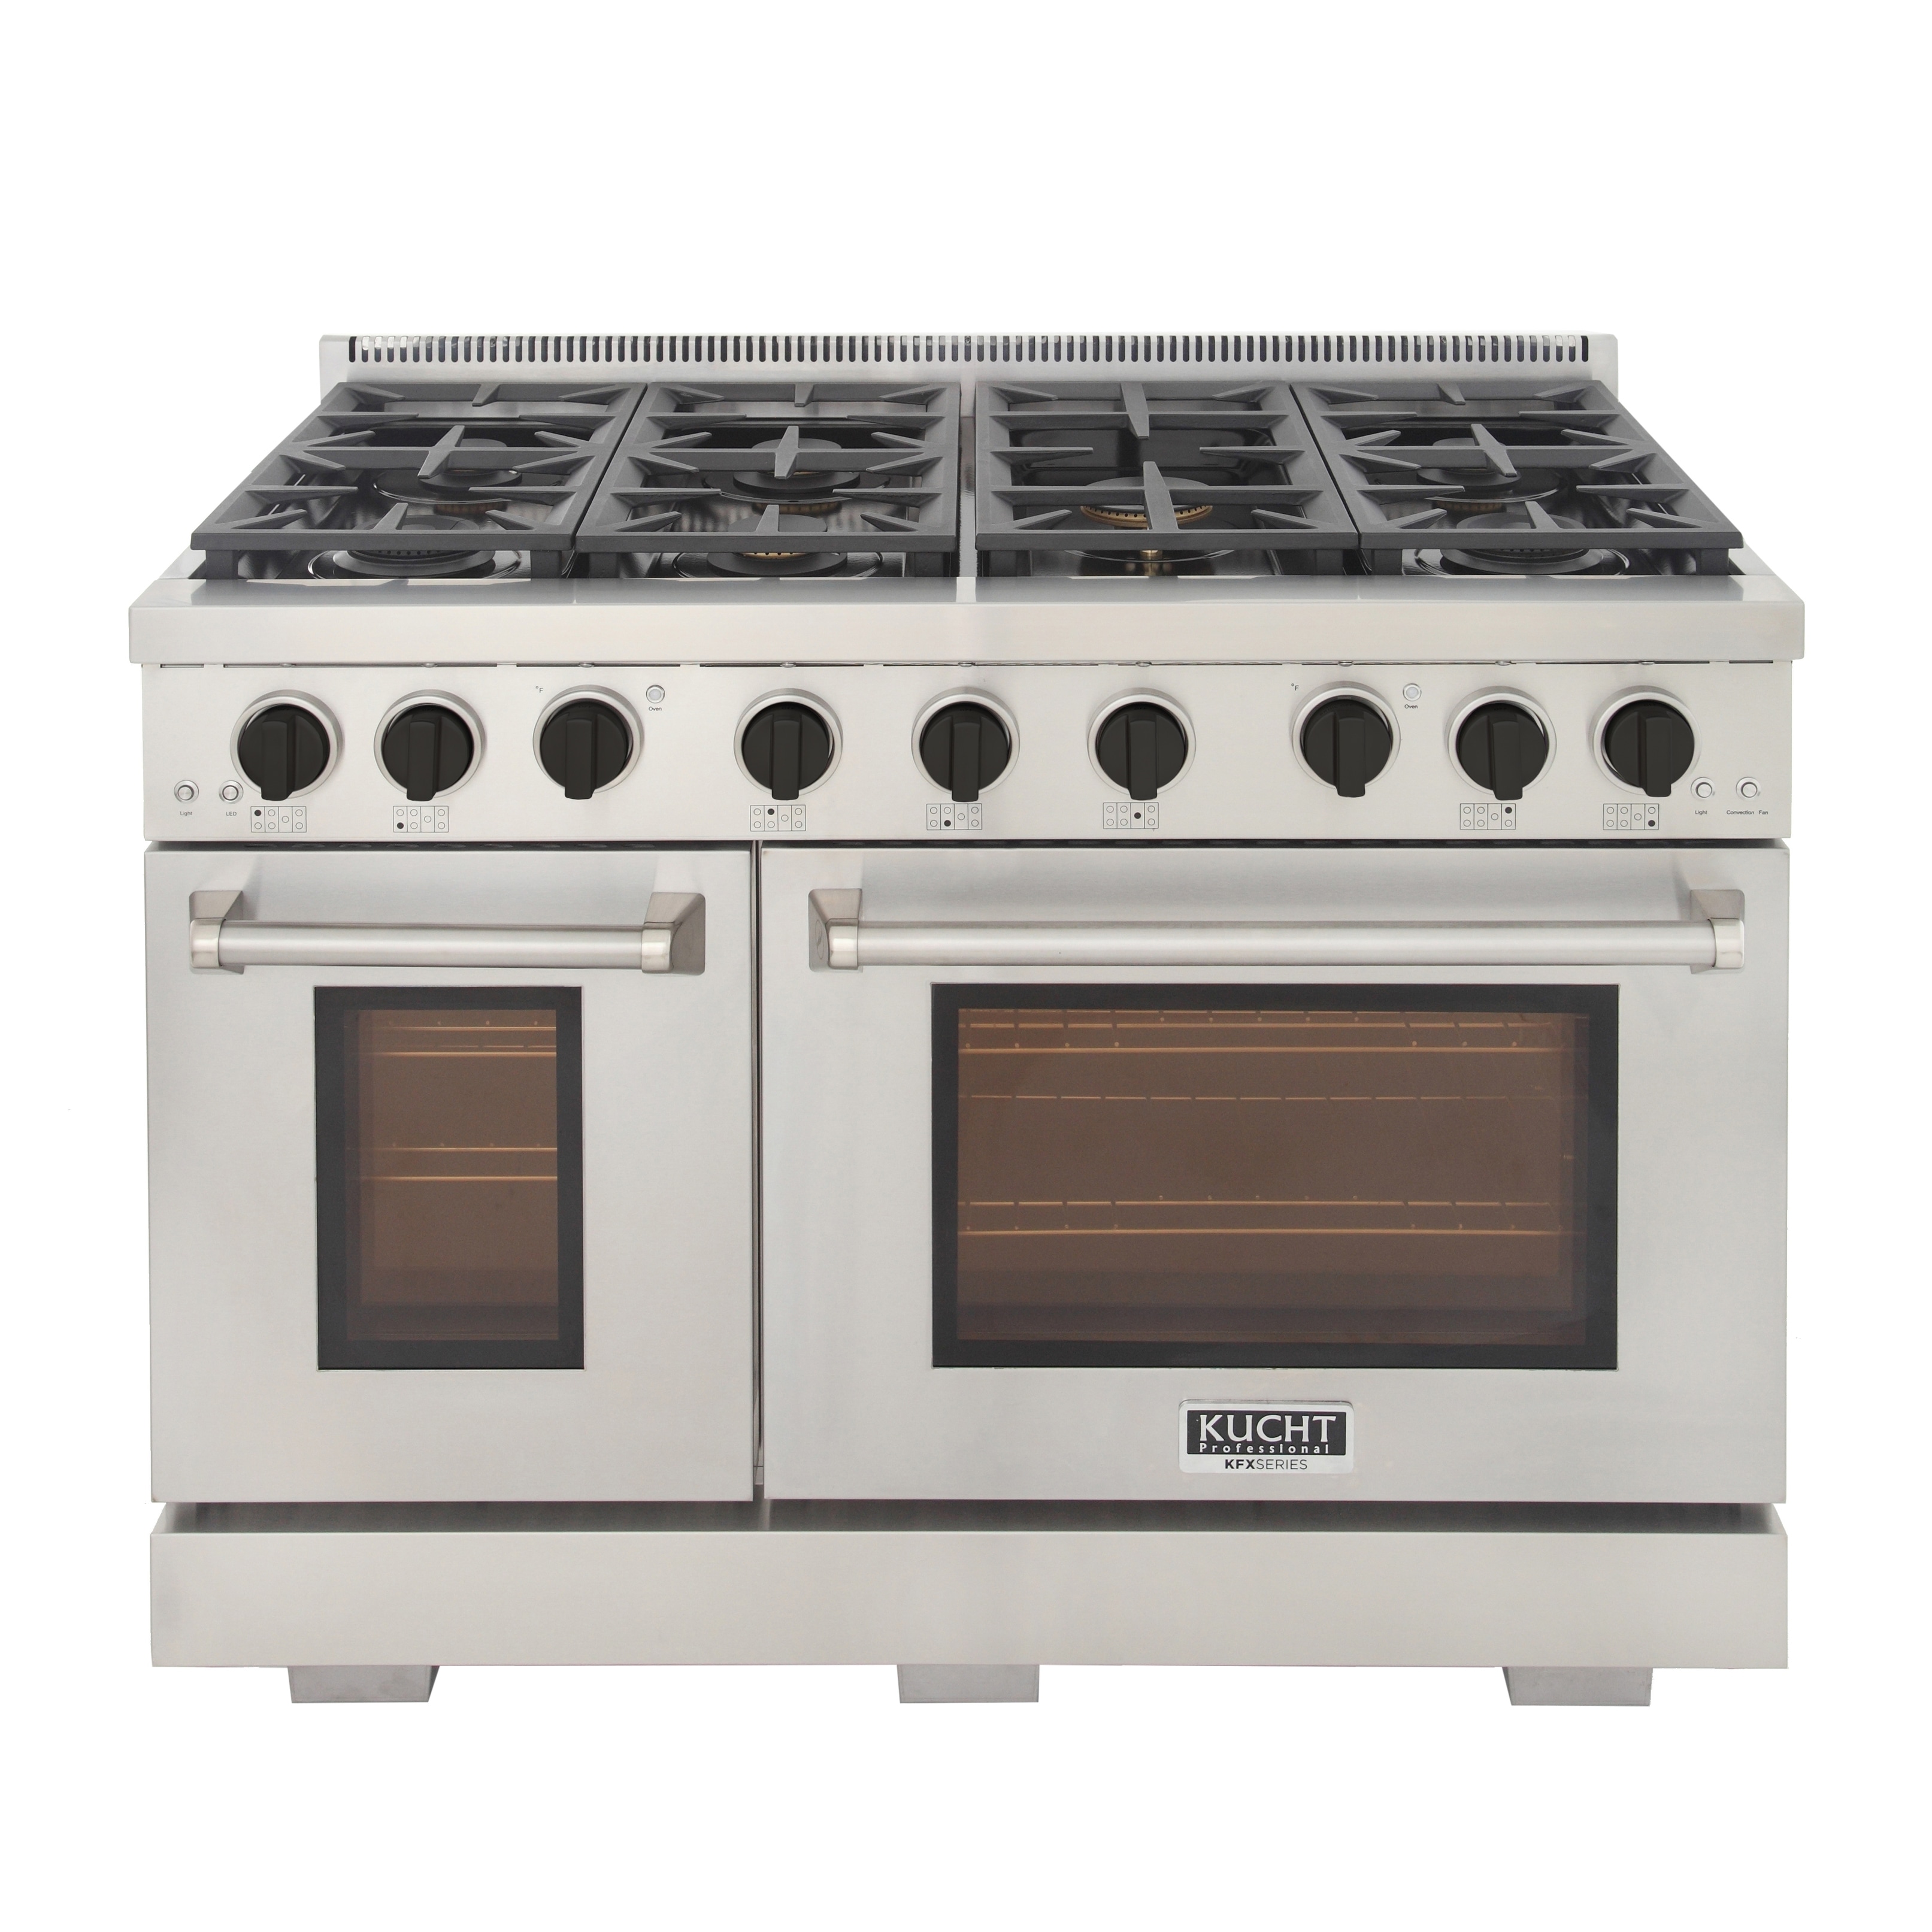 https://ak1.ostkcdn.com/images/products/is/images/direct/184a0afa893d7cfd8b27e0d80302326ba48aa441/Professional-48-in.-6.7-cu.-ft.-Double-Oven-Natural-Gas-Range-with-25K-Power-Burner%2C-Convection-Oven-in-Stainless-Steel.jpg